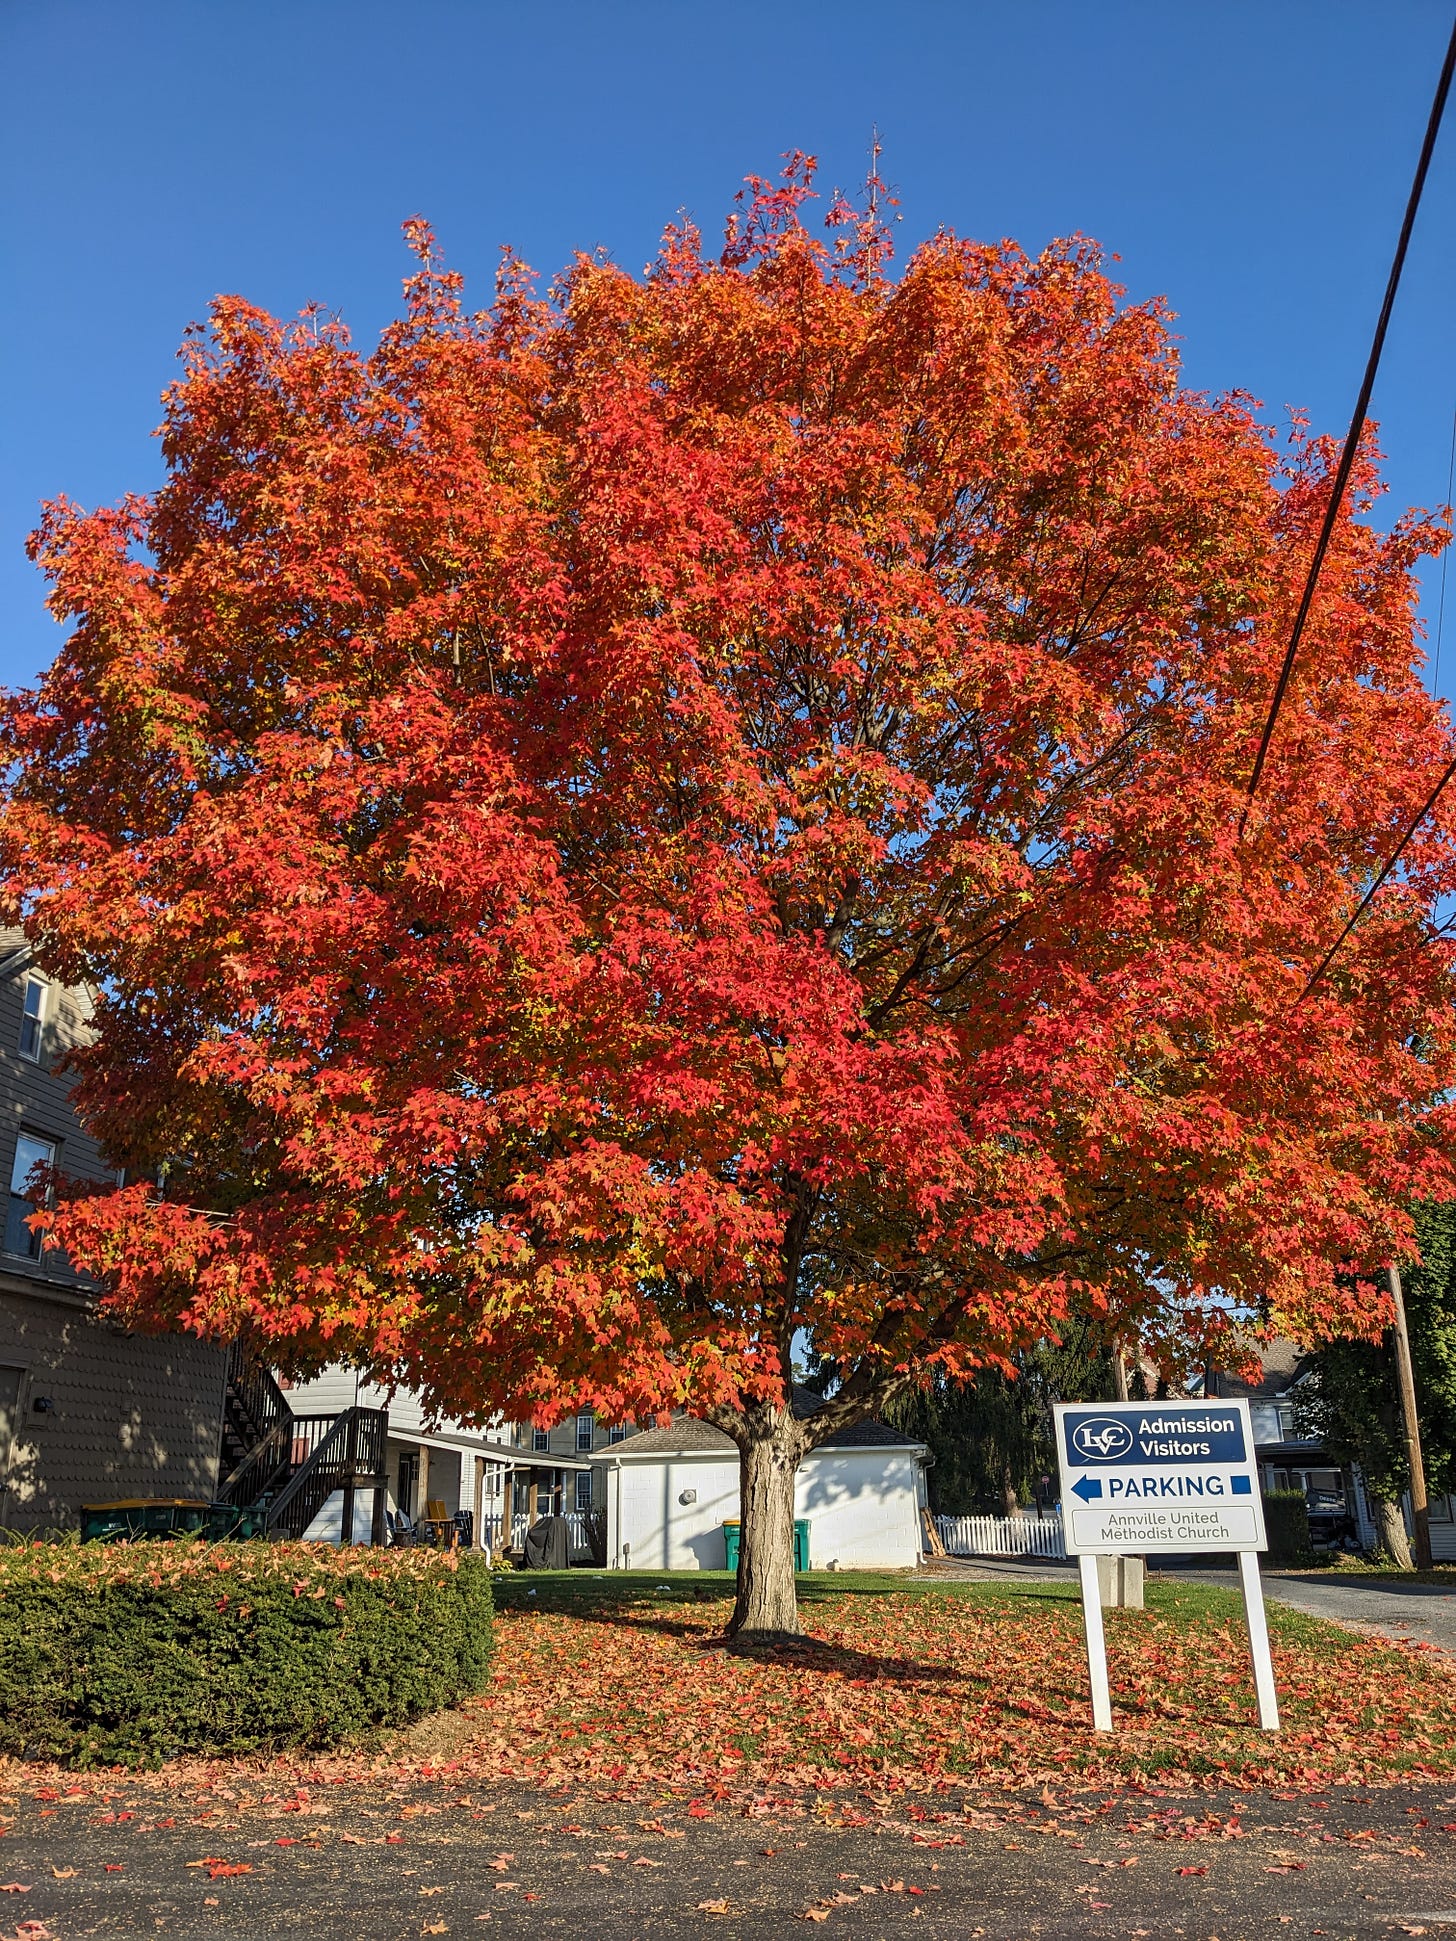 A large maple tree in its full flush of autumn red-gold.